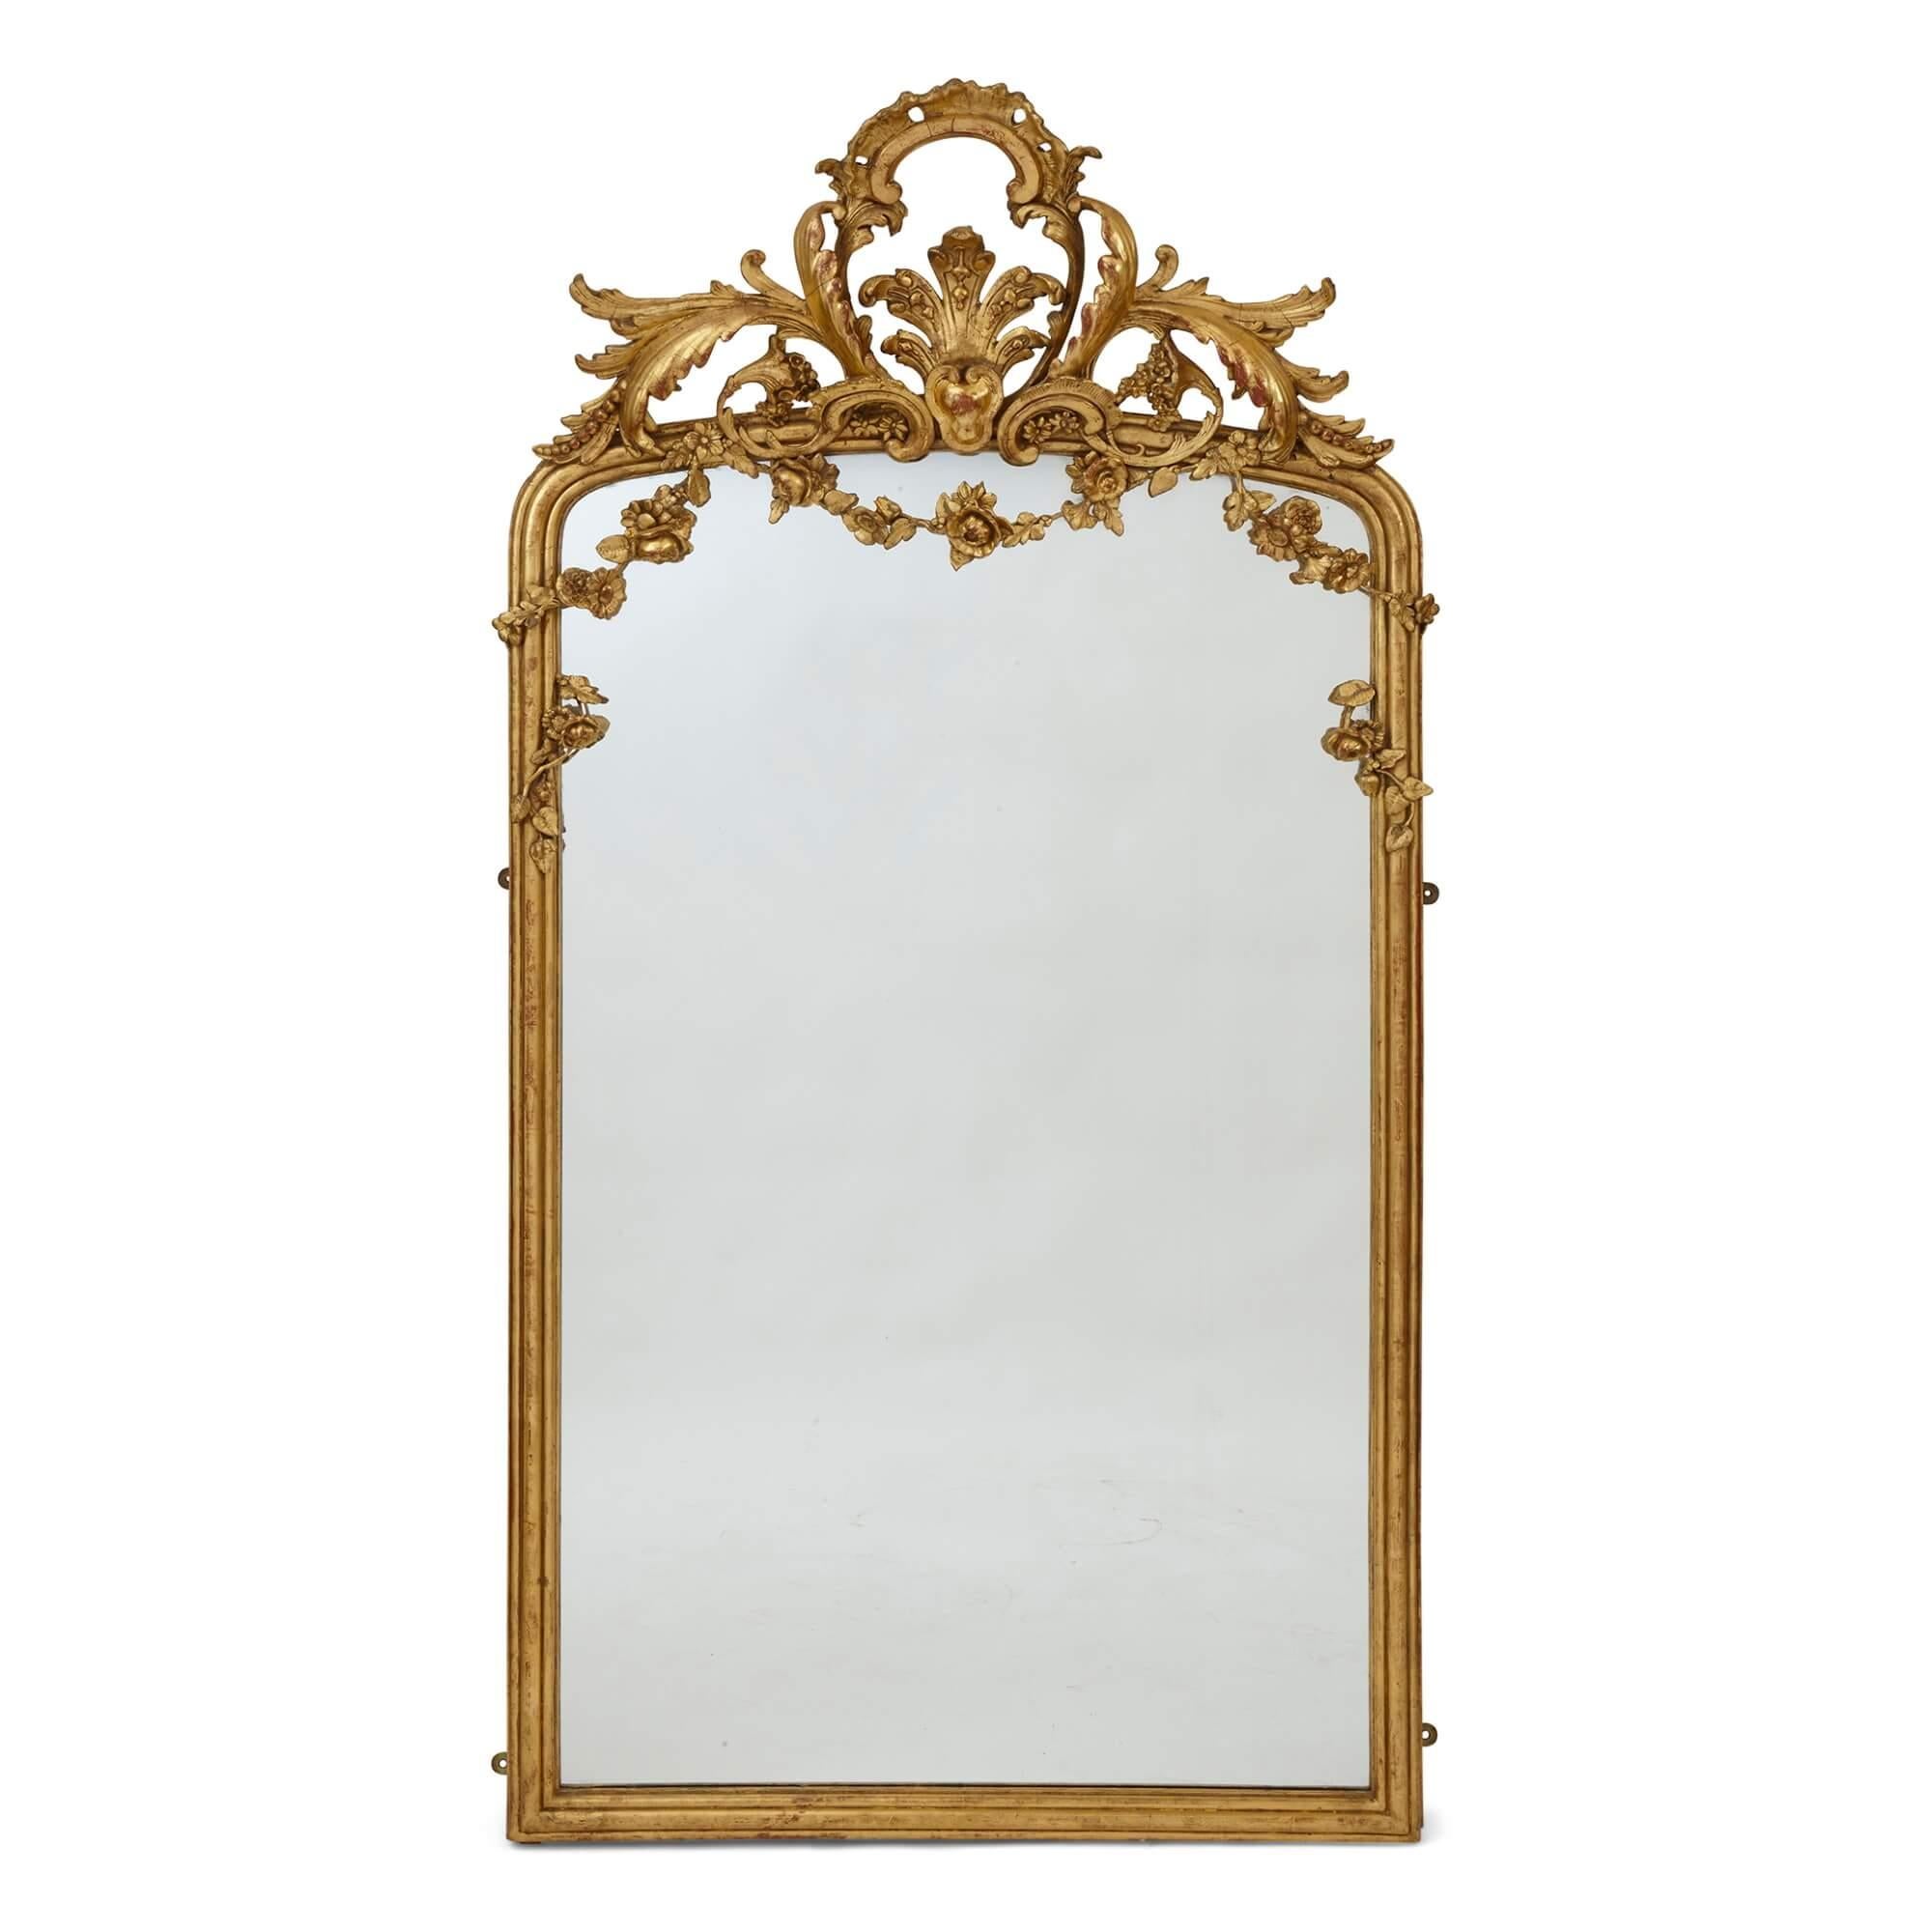 Pair of large French Rococo revival giltwood large mirrors
French, Late 19th Century
Measures: Height 187/191cm, width 98cm, depth 11cm

In a restrained, simple, yet elegant and charming Rococo revival style, this pair of large giltwood mirrors